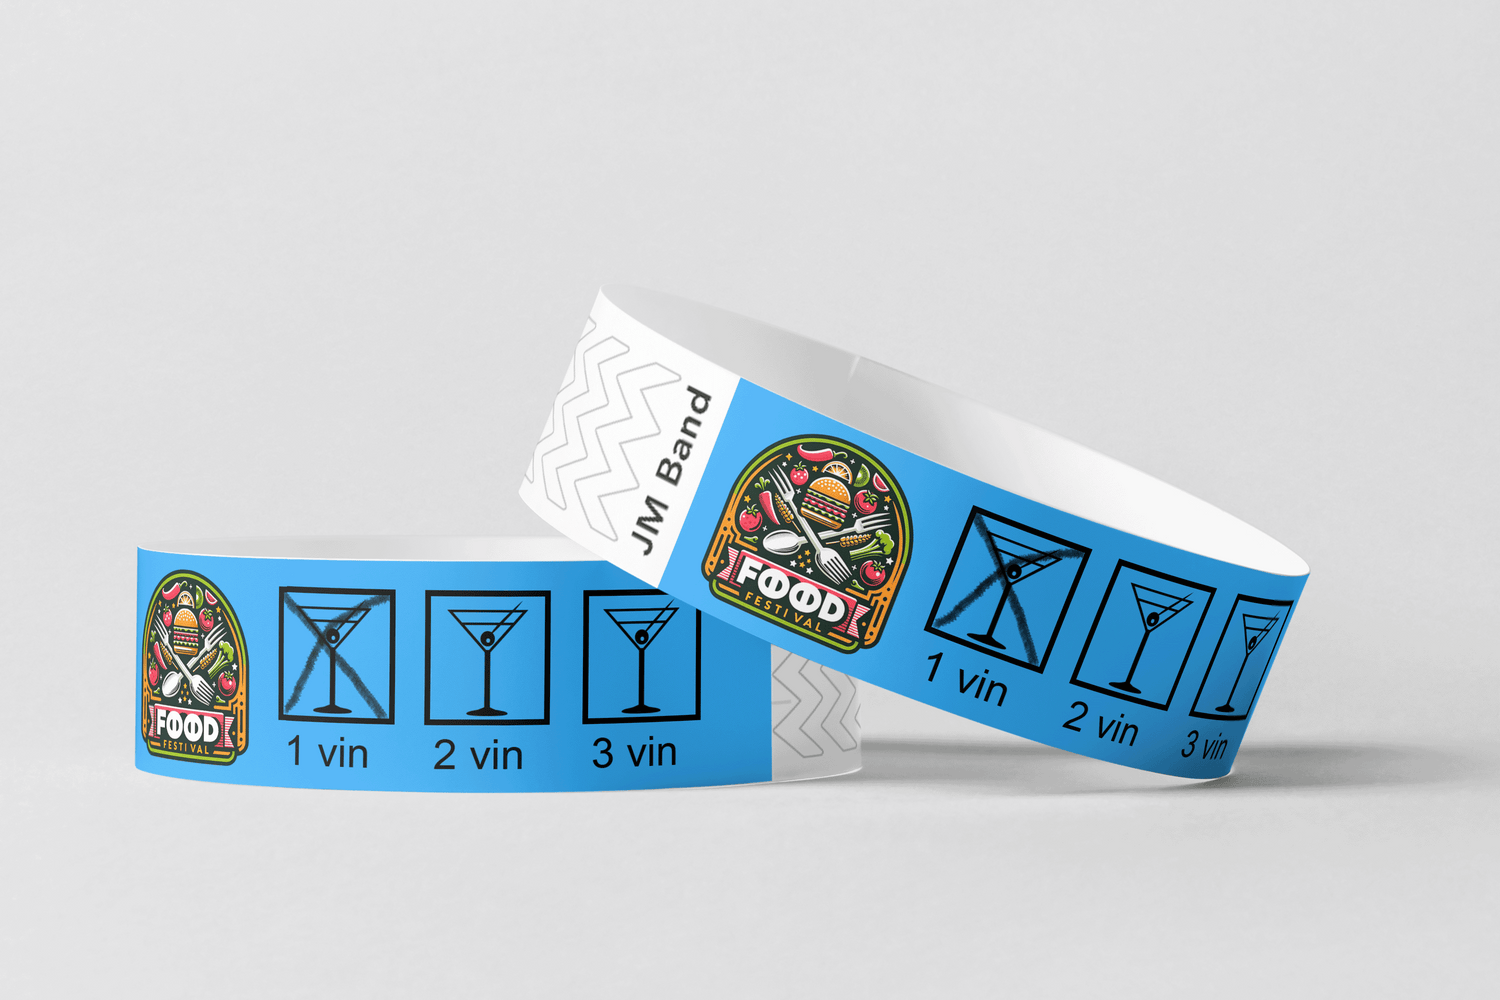 wristbands for food festival and food market